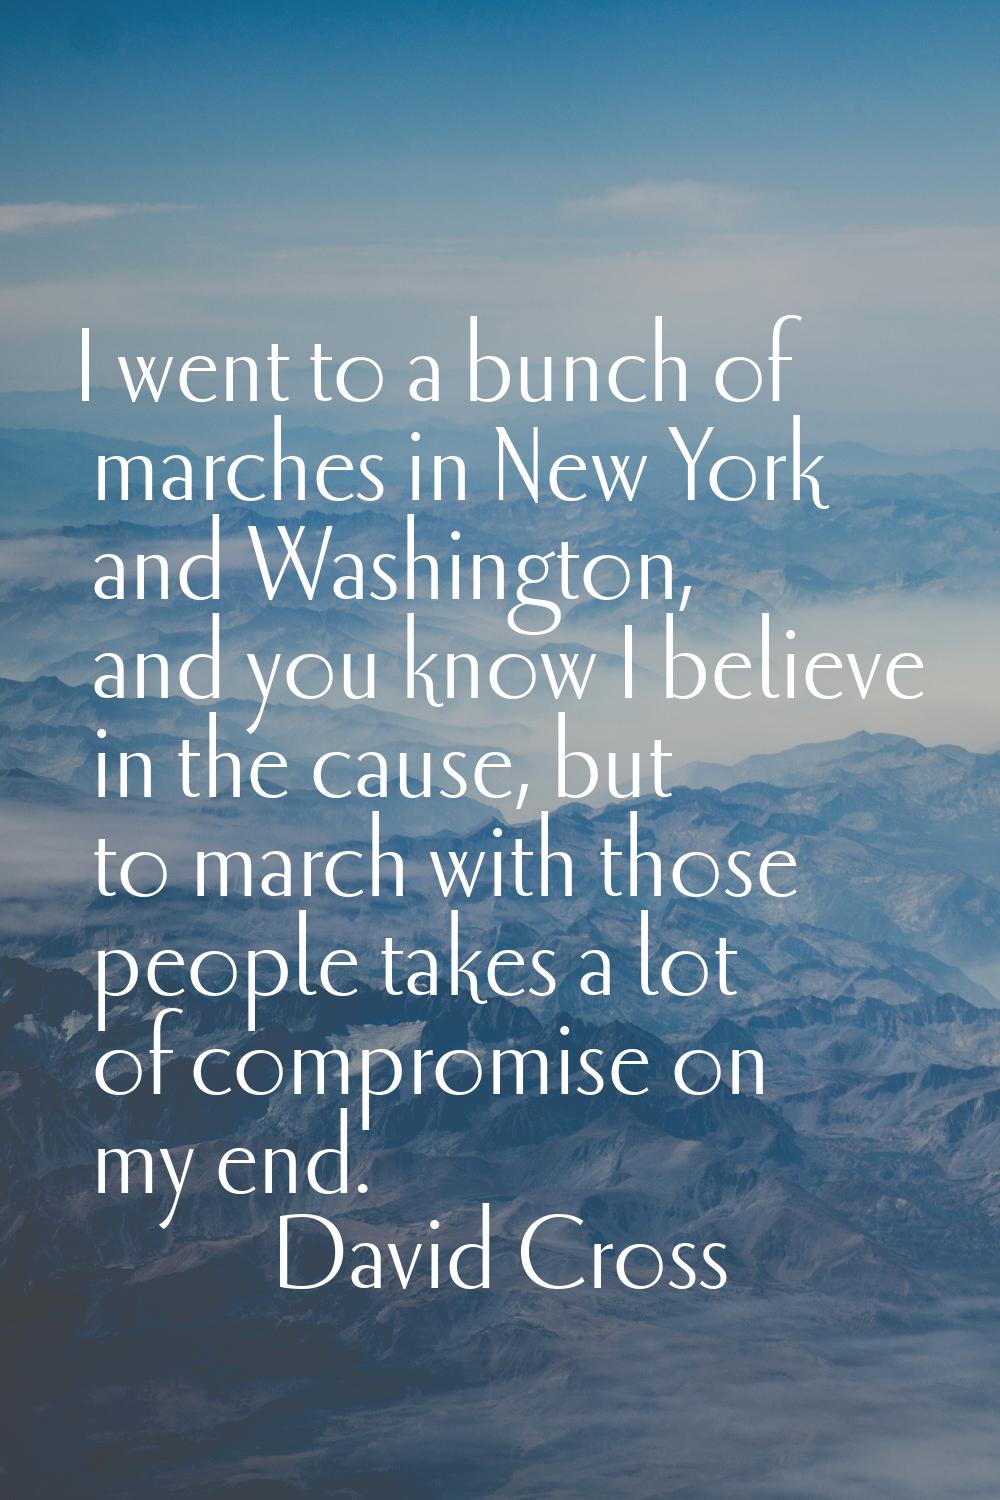 I went to a bunch of marches in New York and Washington, and you know I believe in the cause, but t